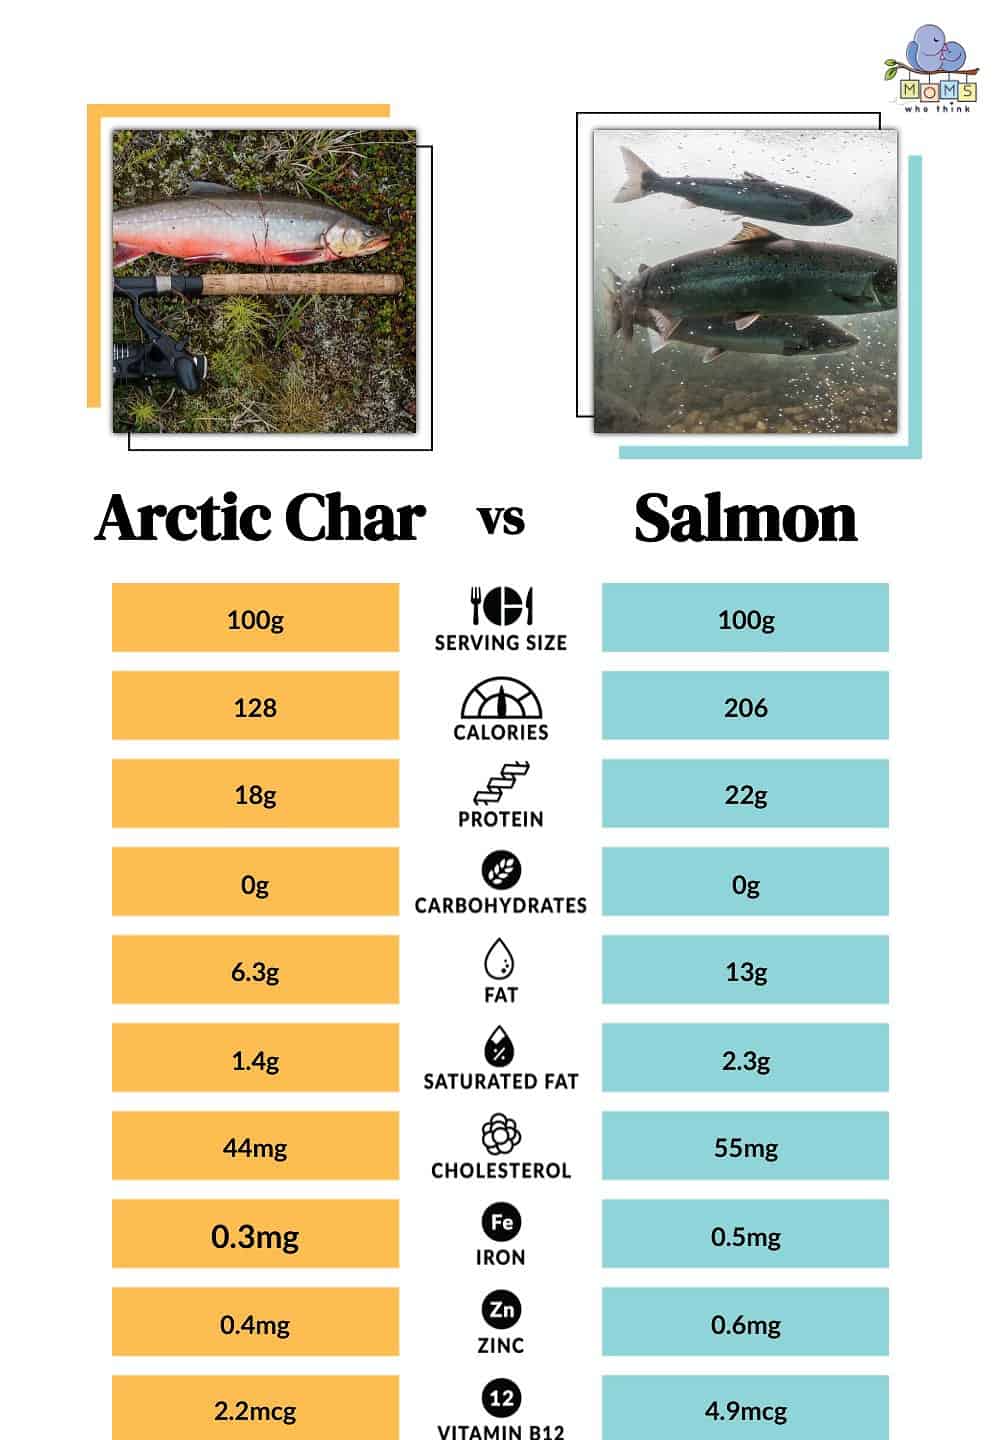 Arctic Char vs Salmon Nutritional Facts